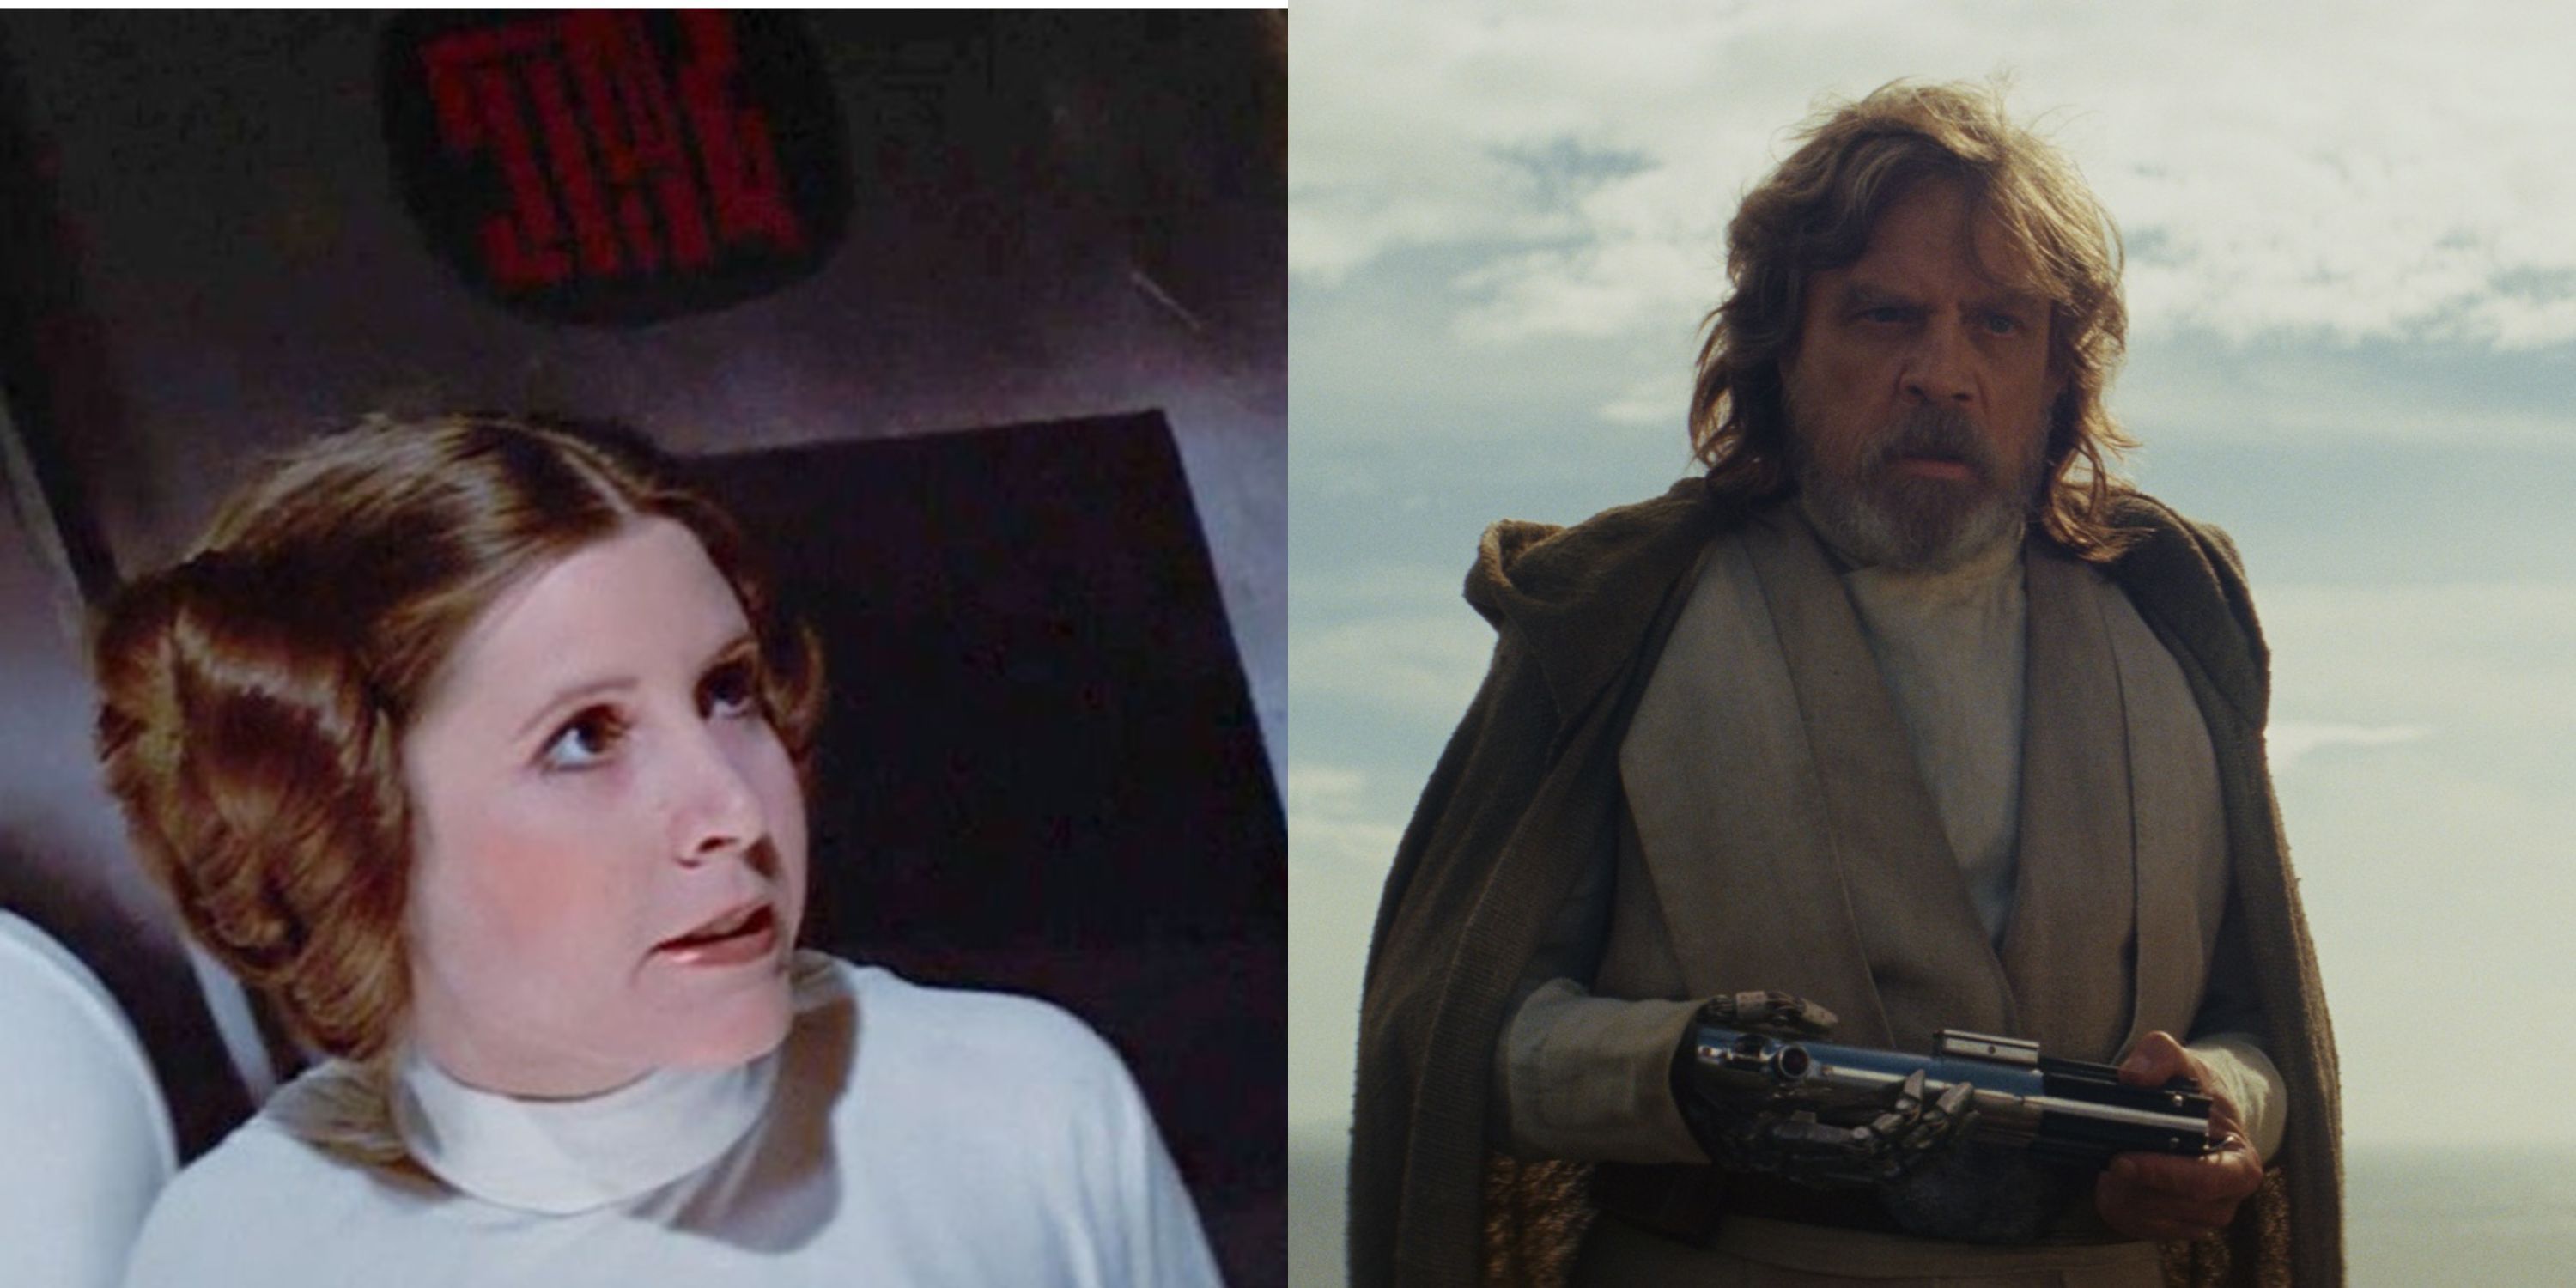 Featured image Leia in a New Hope and Luke Skywalker in The Last Jedi